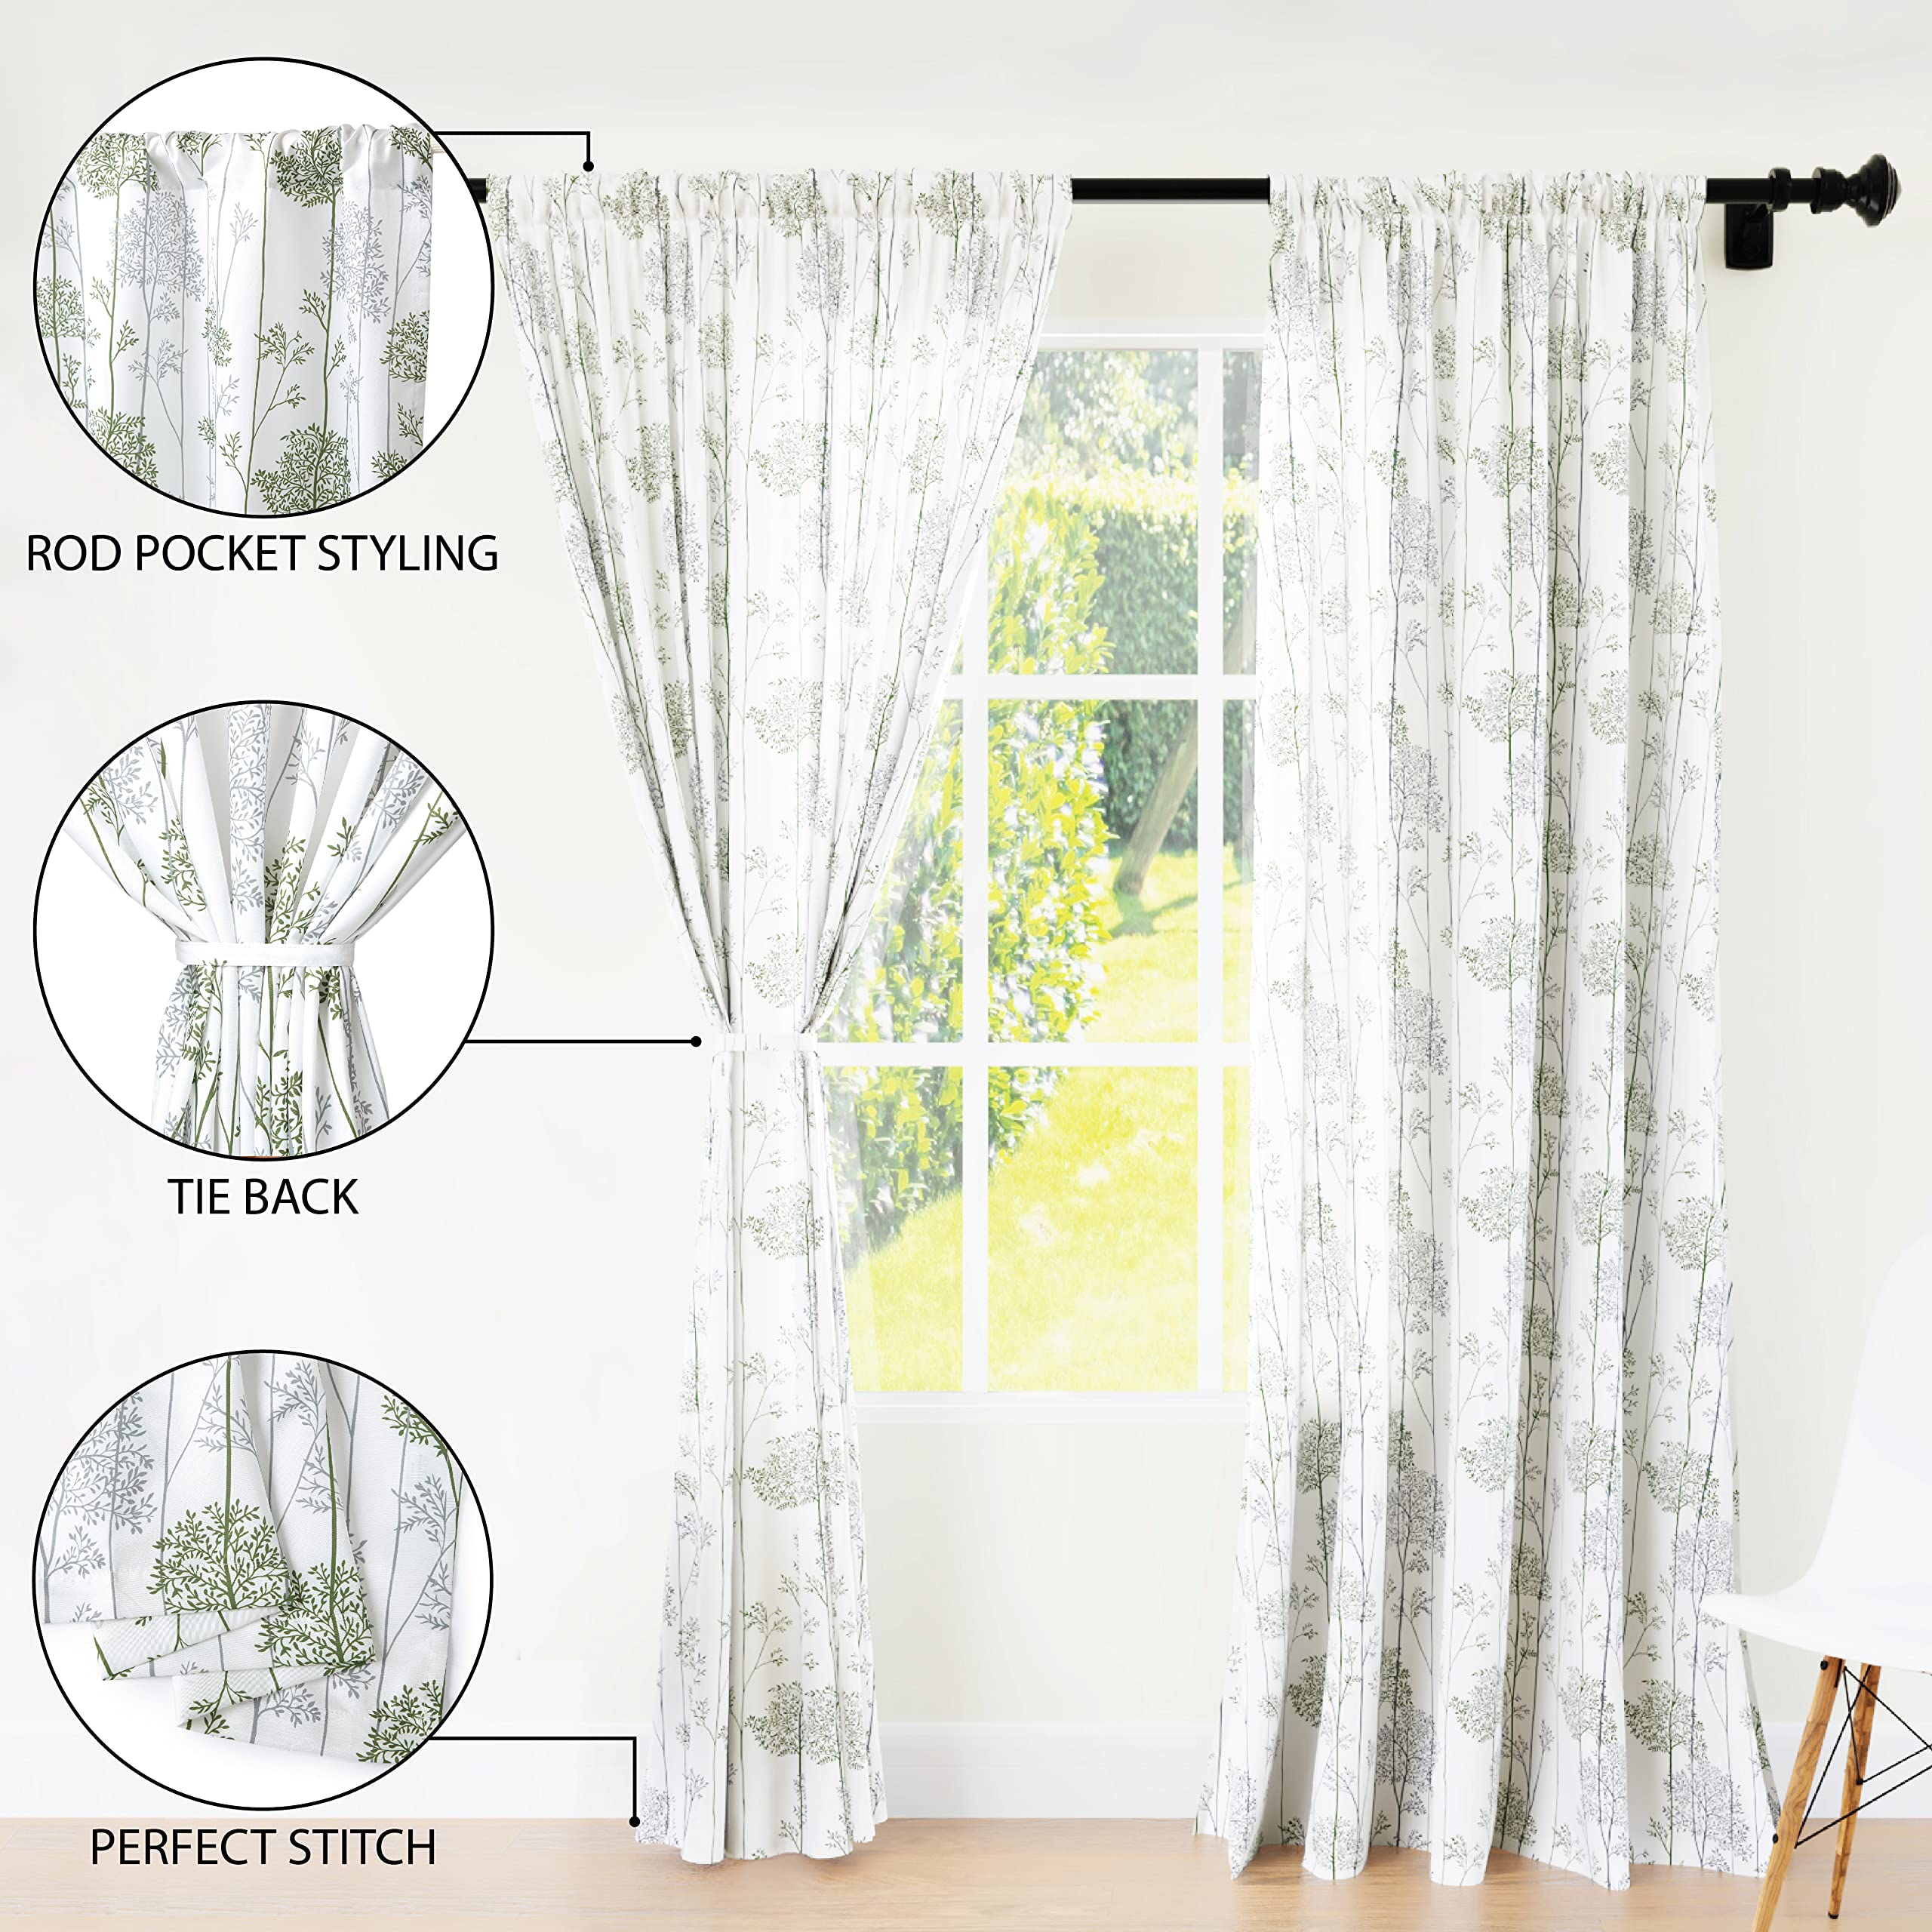 Encasa Homes Polyester Printed Door Curtain for 7 ft with Tie Back, Rod Pocket, Light-Filtering, Curtains for Kitchen, Bedroom, Living Room (142x213 cm), Green Branches, Set of 2